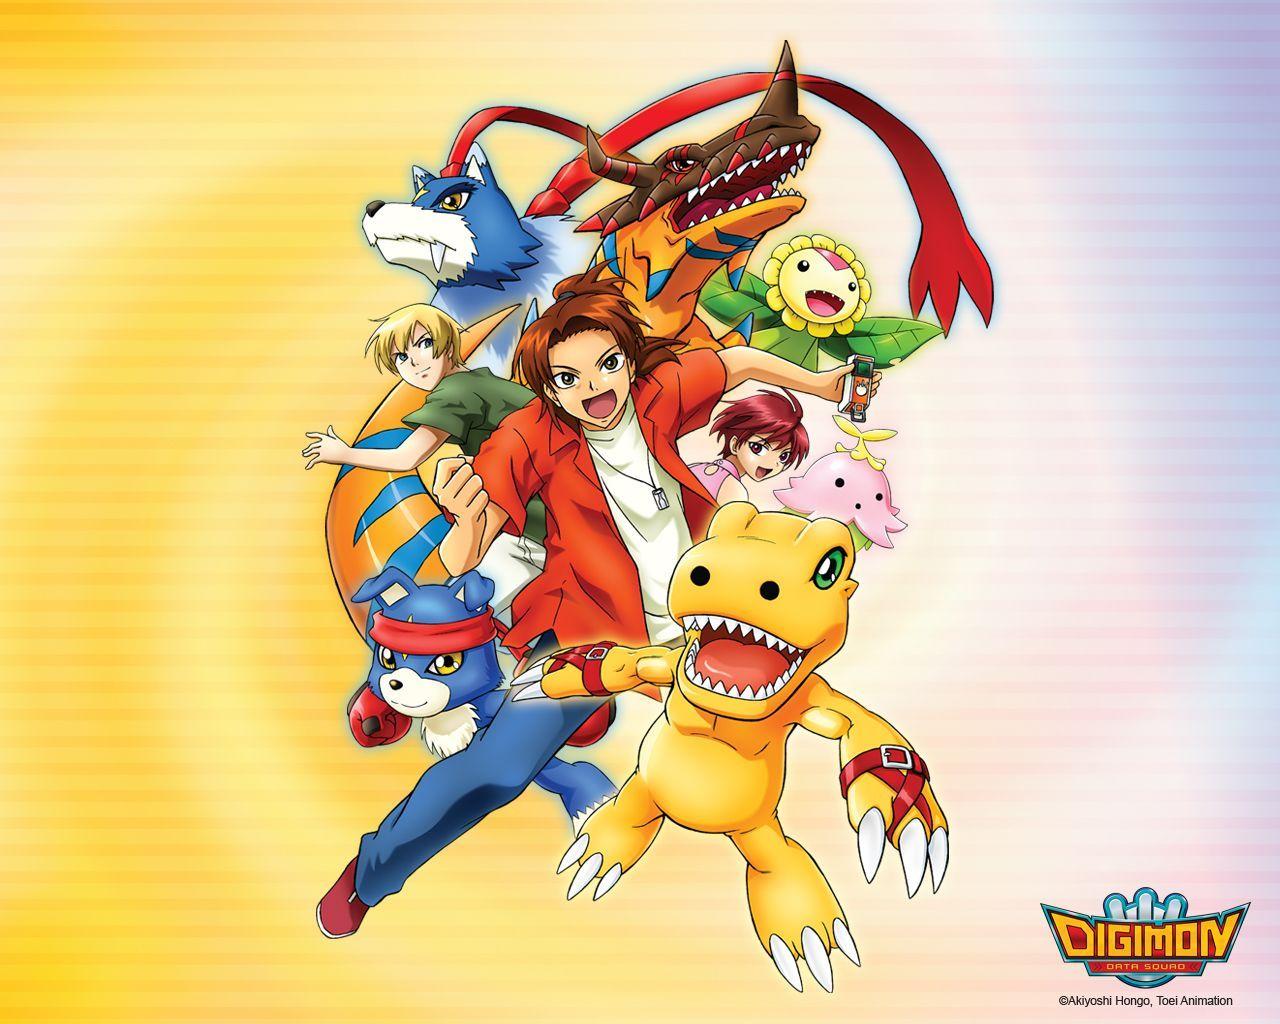 Digimon Savers. in my opinion, this was nowhere near as good as its